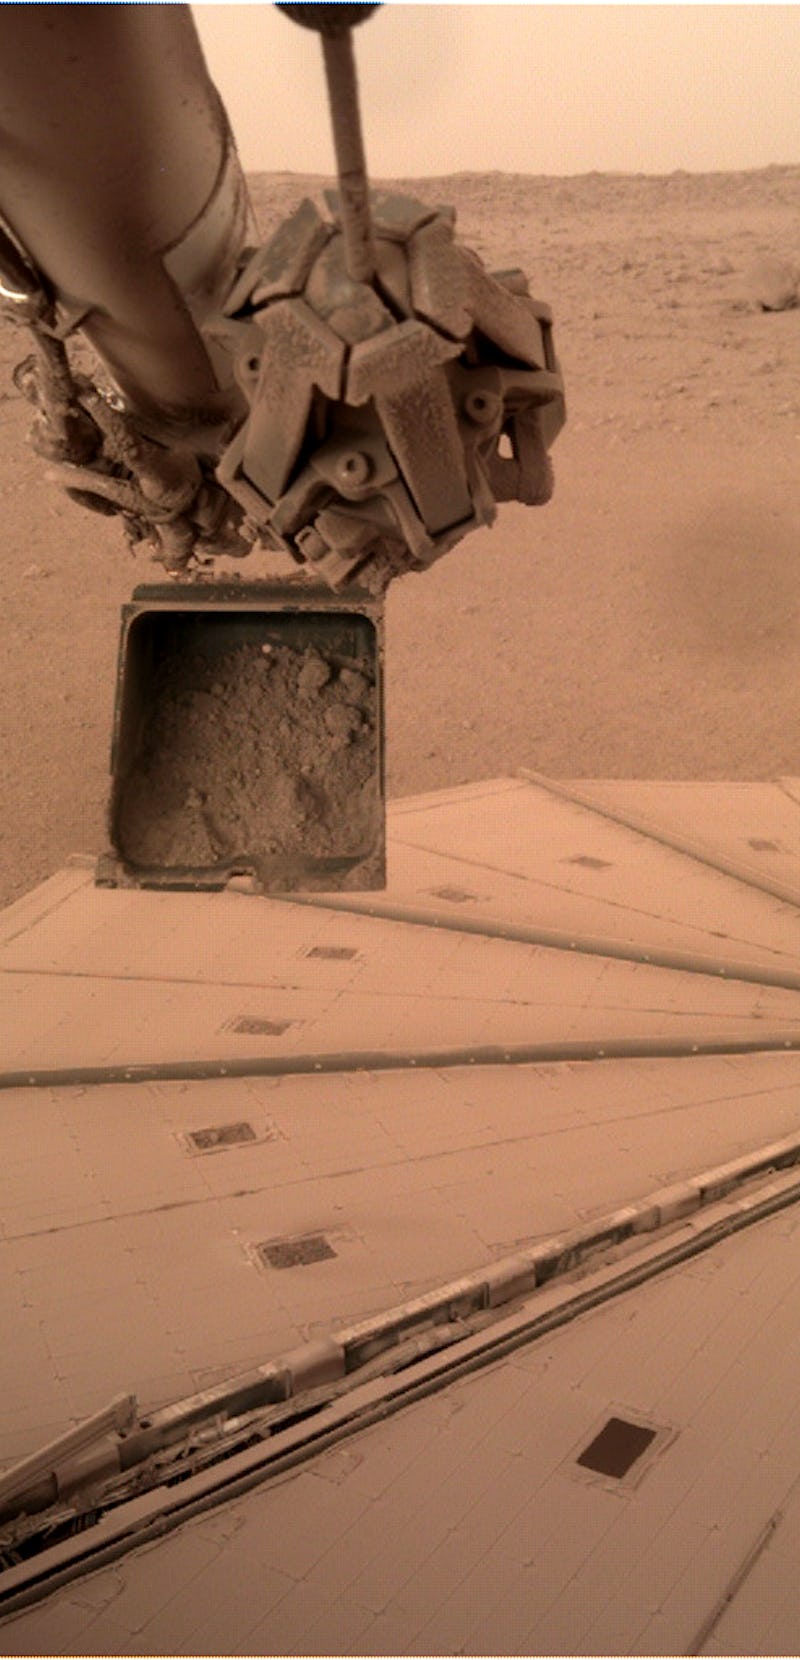 Mars InSight's dirt scoop and its solar panels in the background